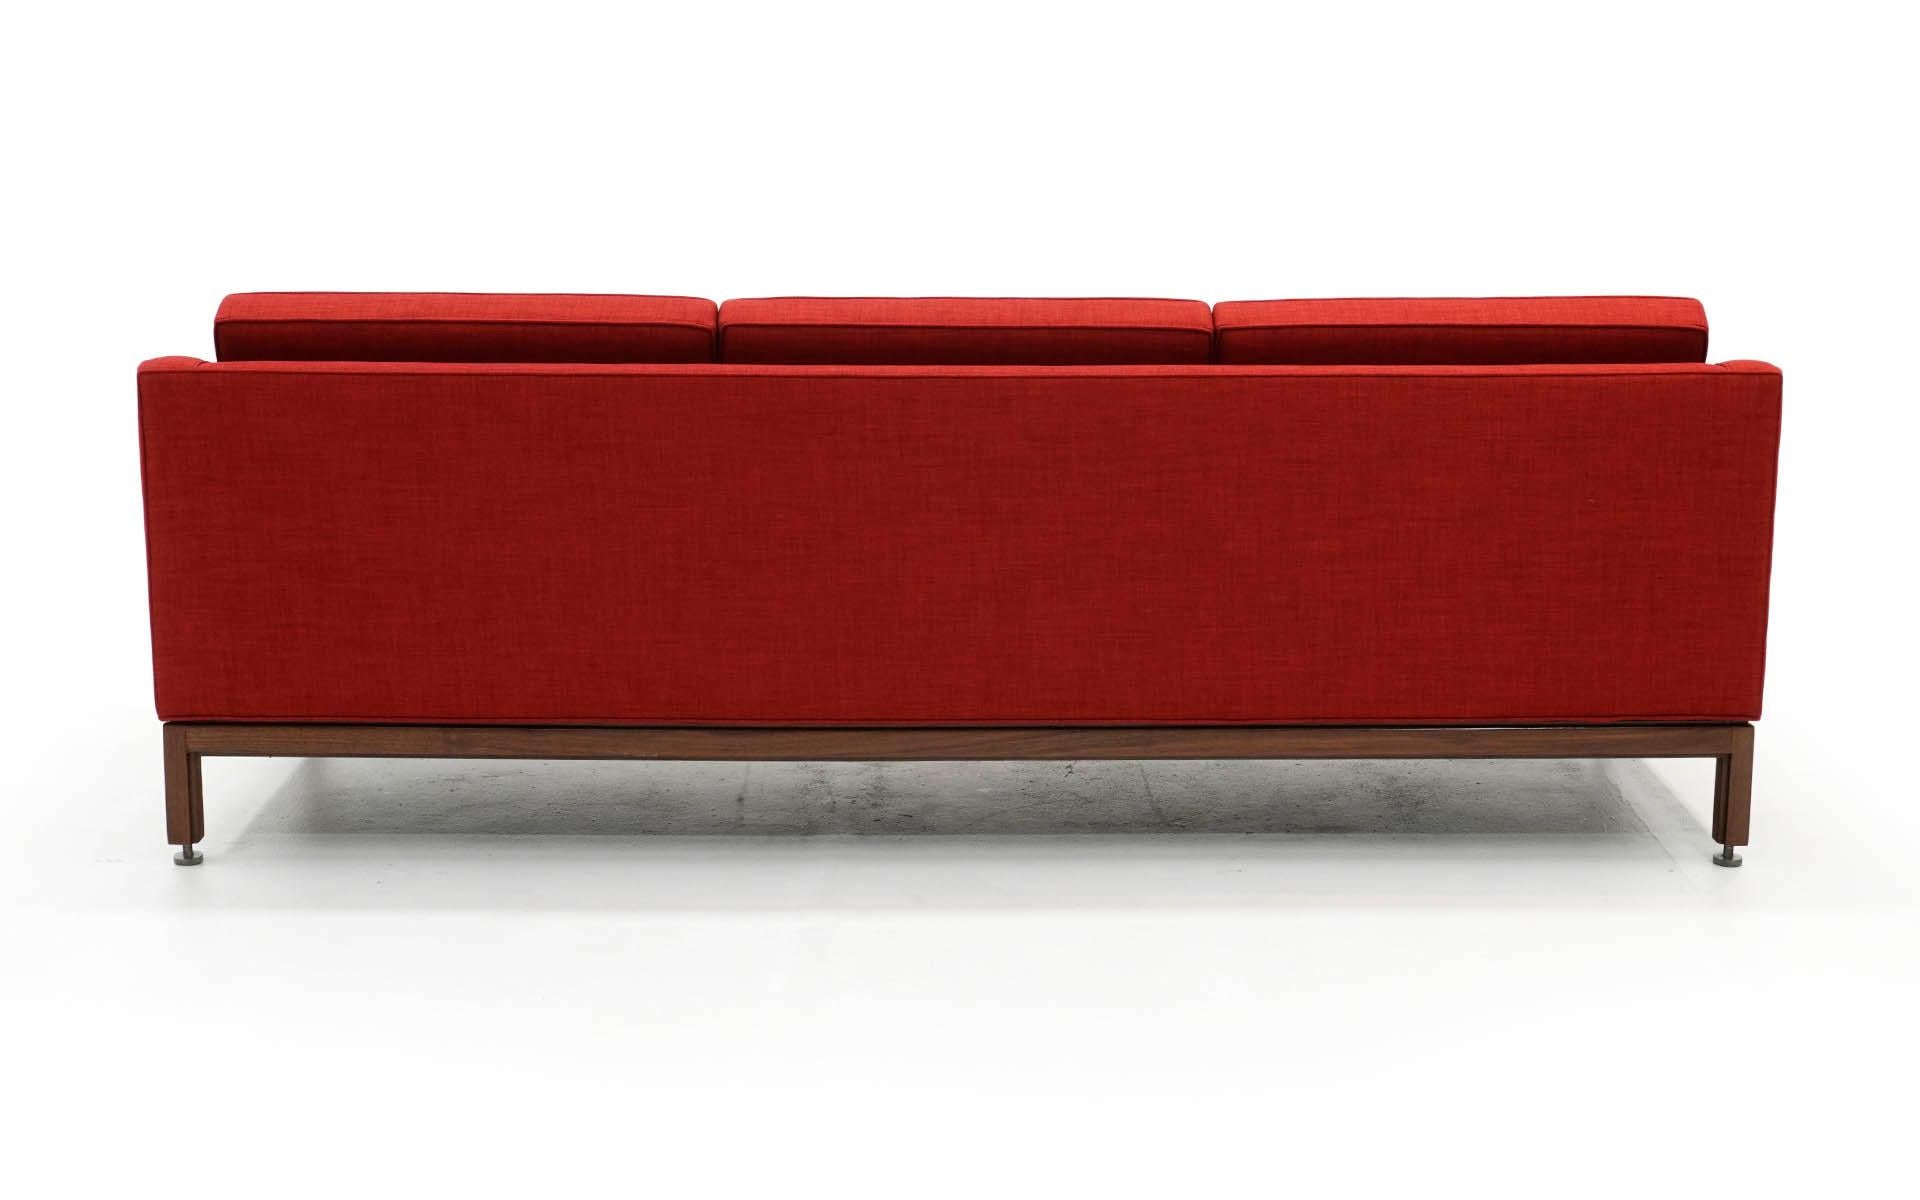 Mid-20th Century Red Three-Seat Sofa with Walnut Frame by Jens Risom, Expertly Restored